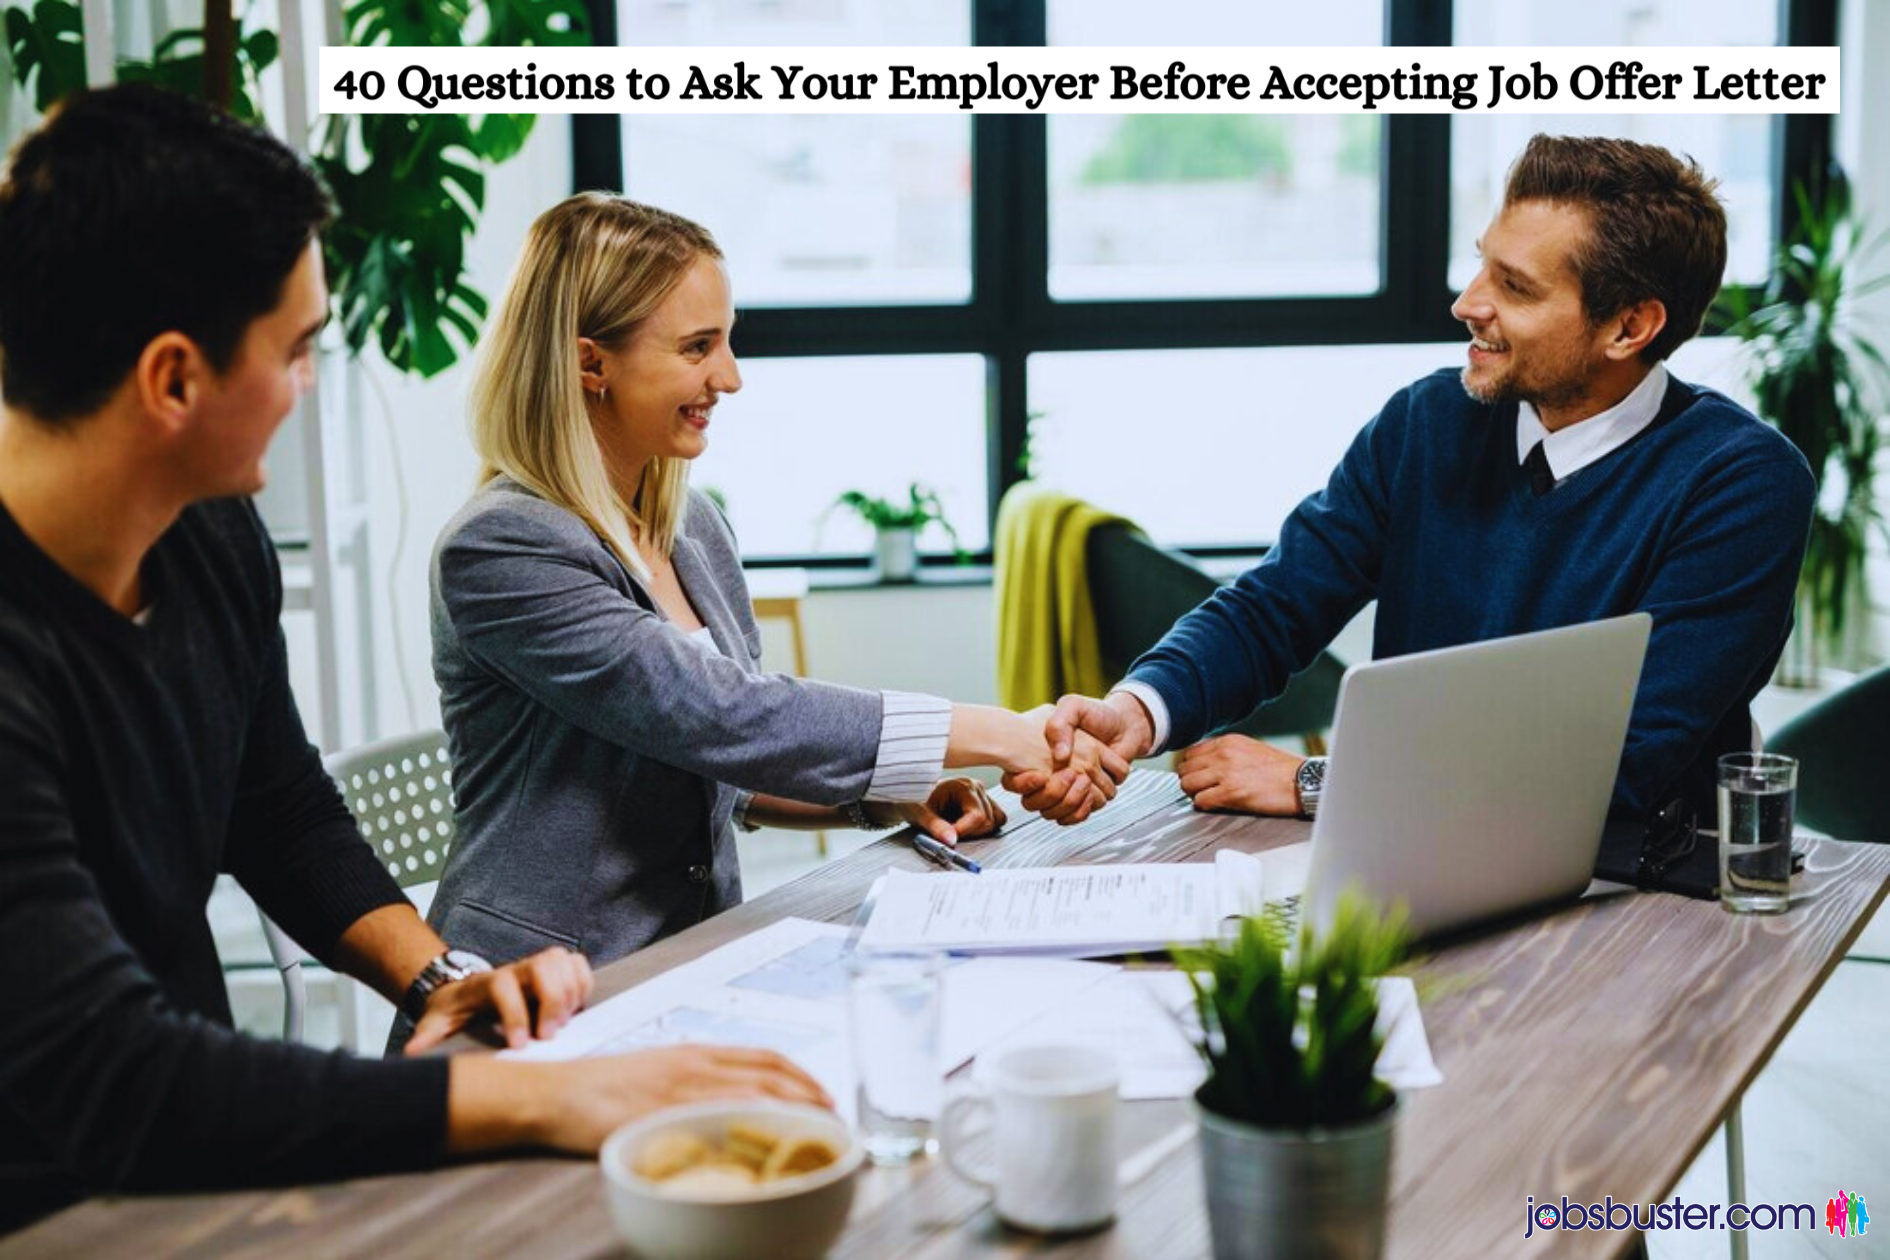 40 Questions to Ask Your Employer Before Accepting Job Offer Letter